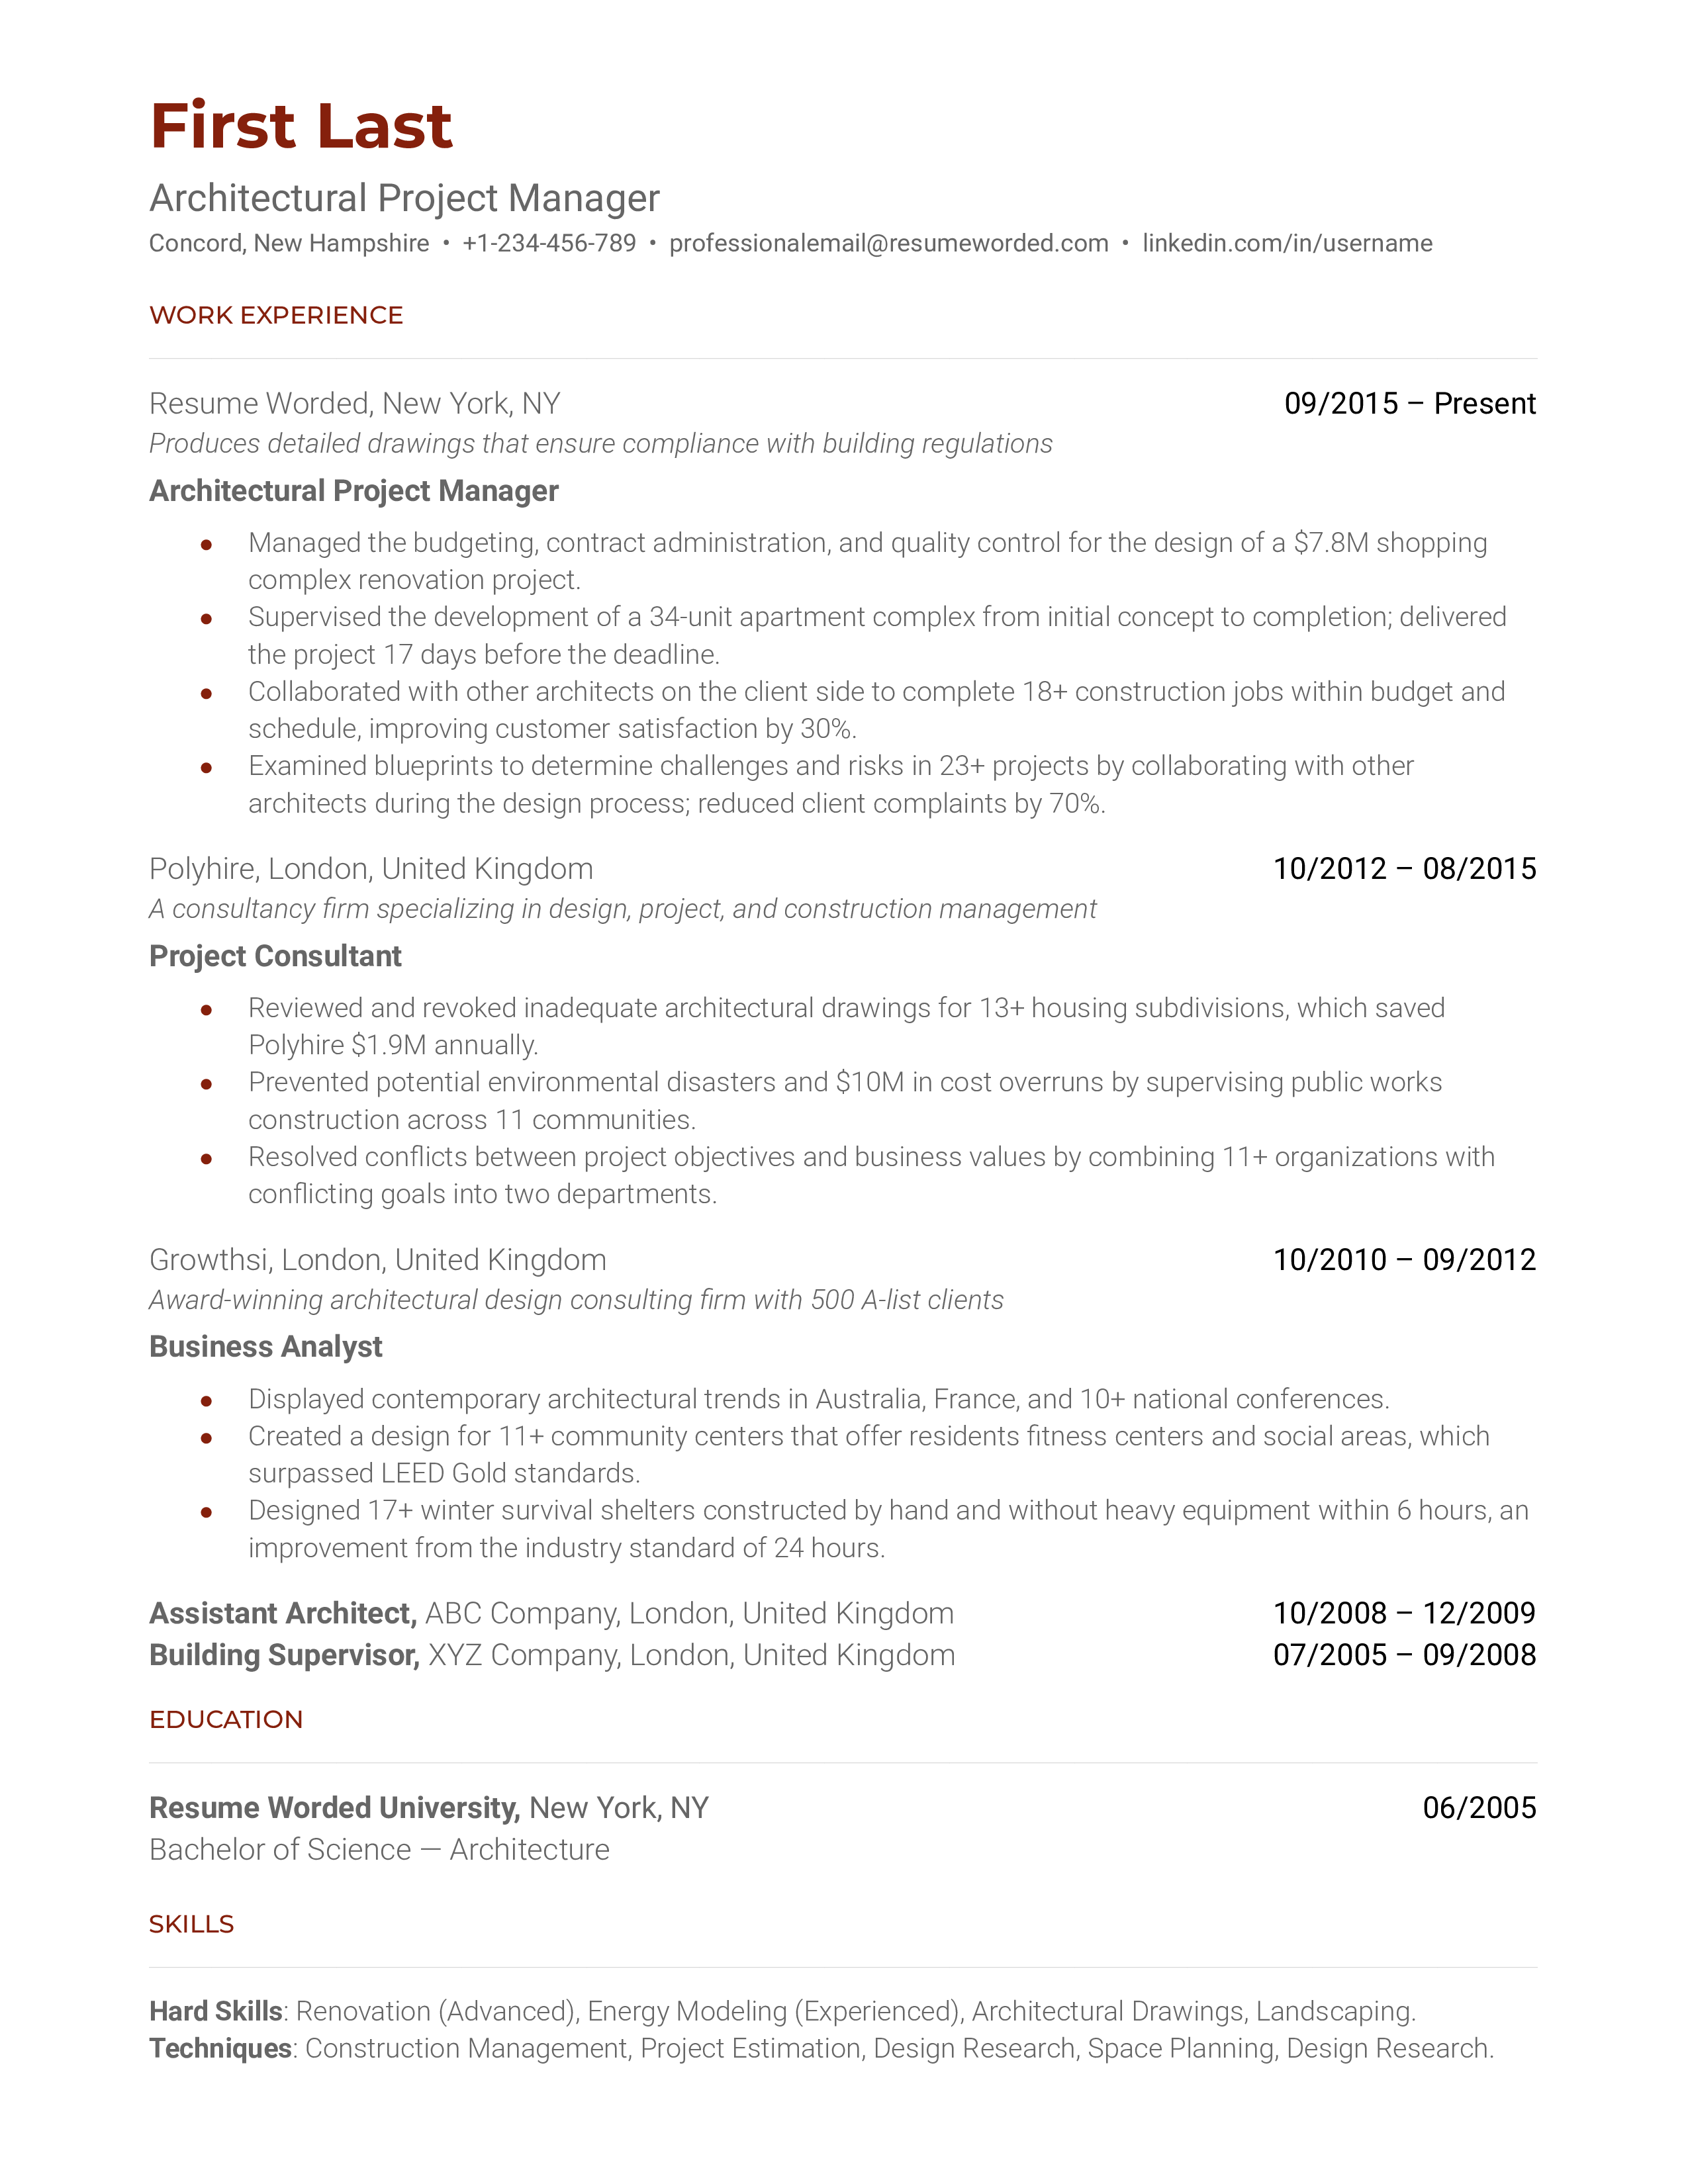 A resume for an architectural project manager with a BS in architecture and experience as a project consultant.